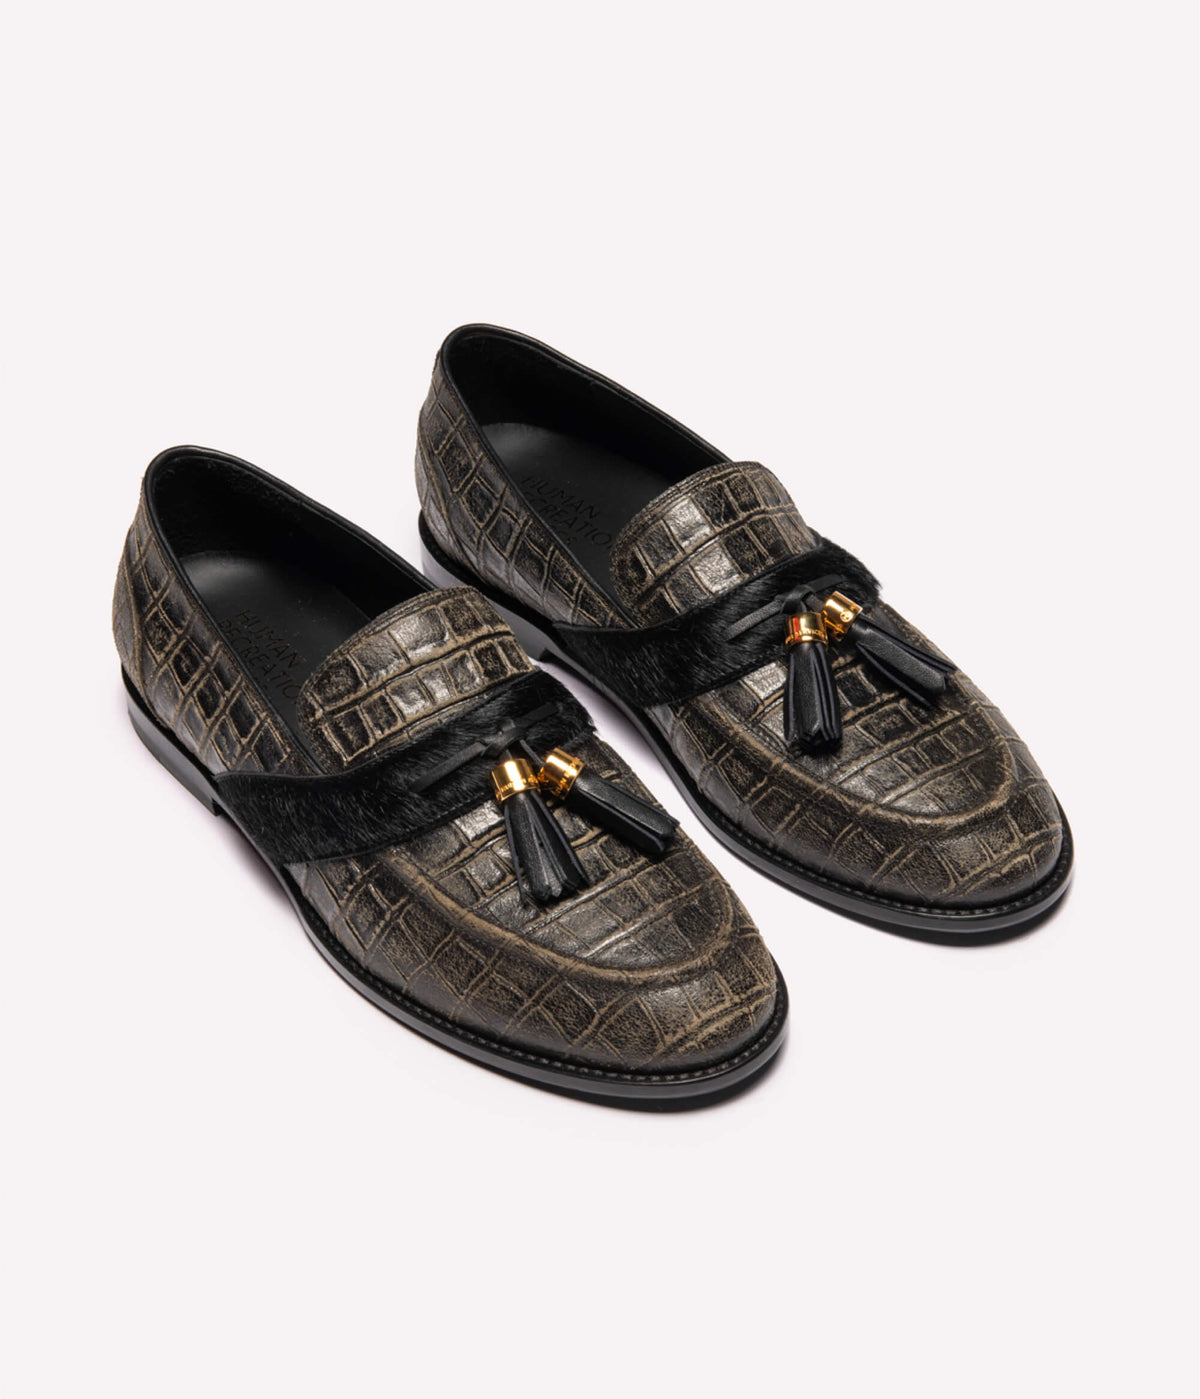 HUMAN RECREATIONAL SERVICES DEL REY TASSEL LOAFER IN CROCODILE-TEXTURED LEATHER